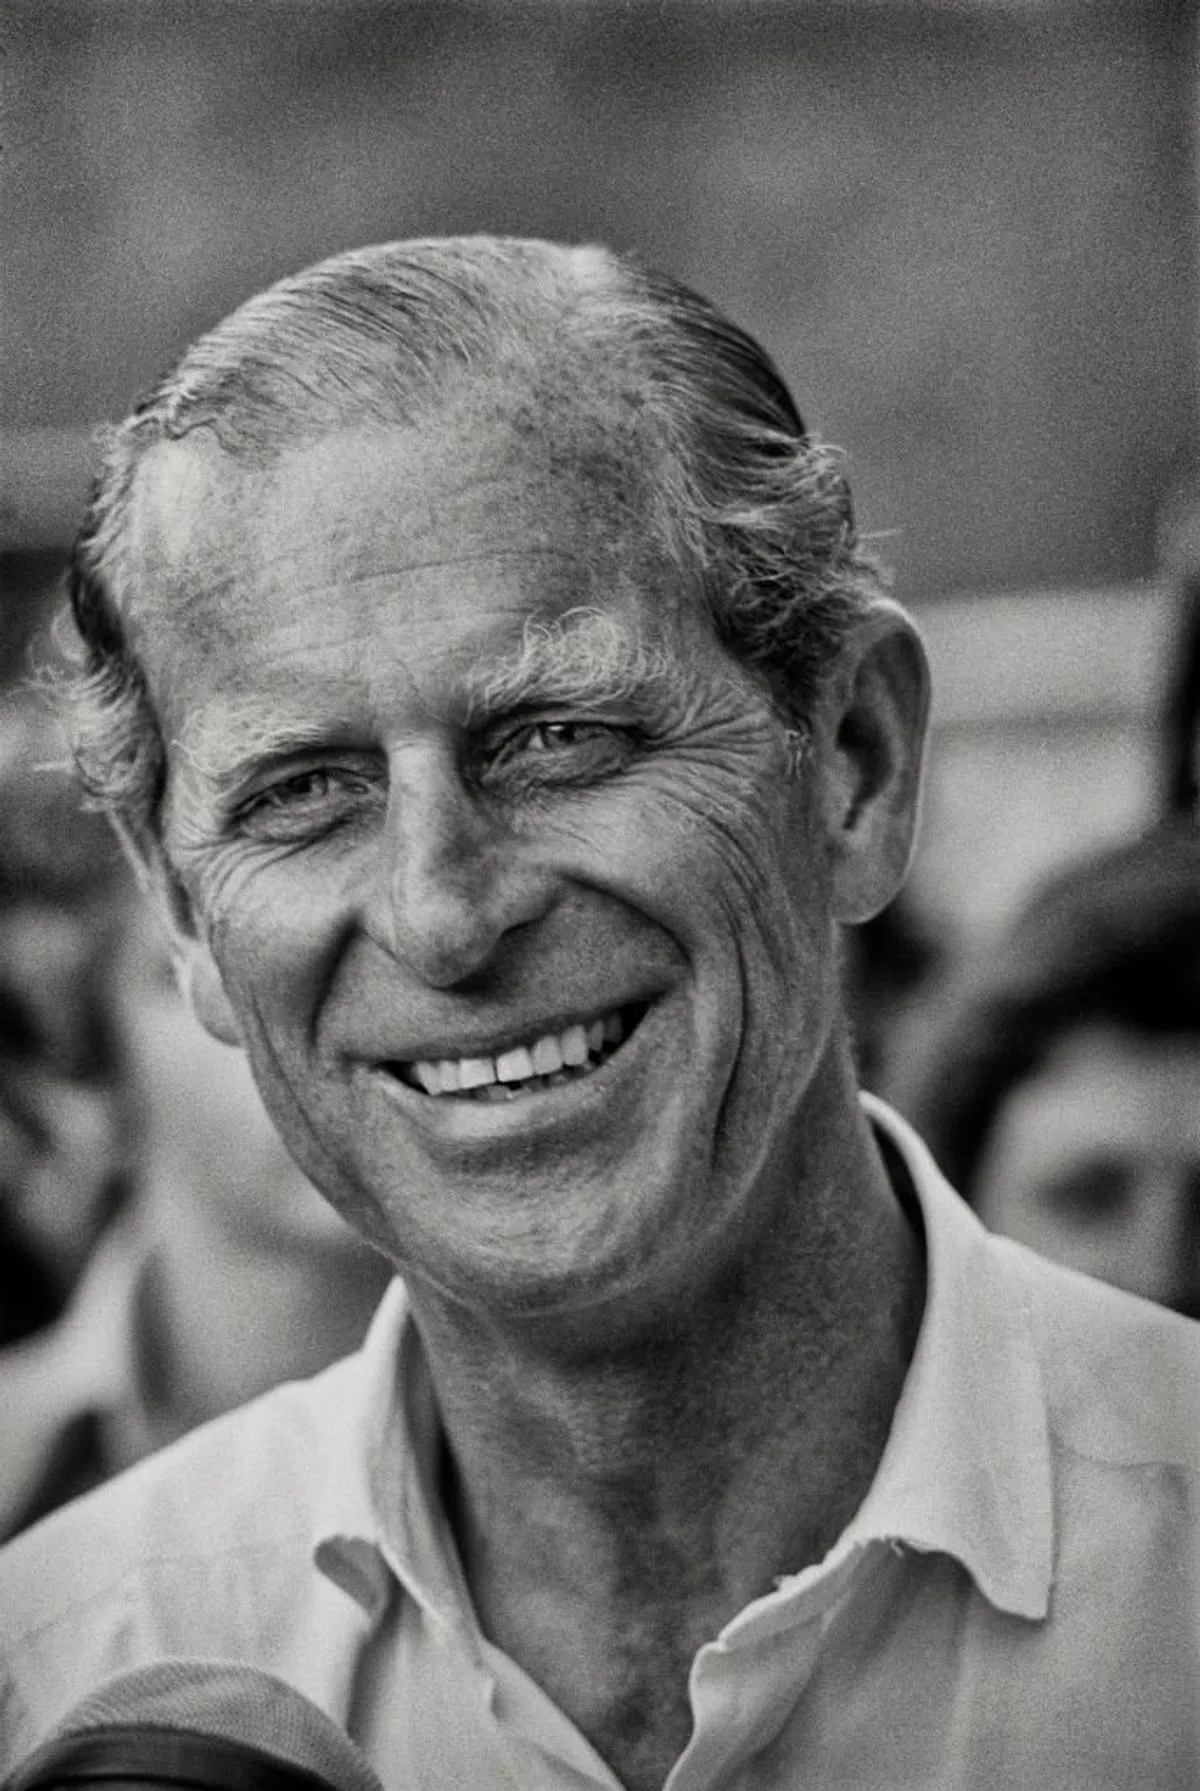 Prince Philip, Duke of Edinburgh smiles during a carriage driving event at Home Park, Windsor, England, July 1975 | Photo: Getty Images